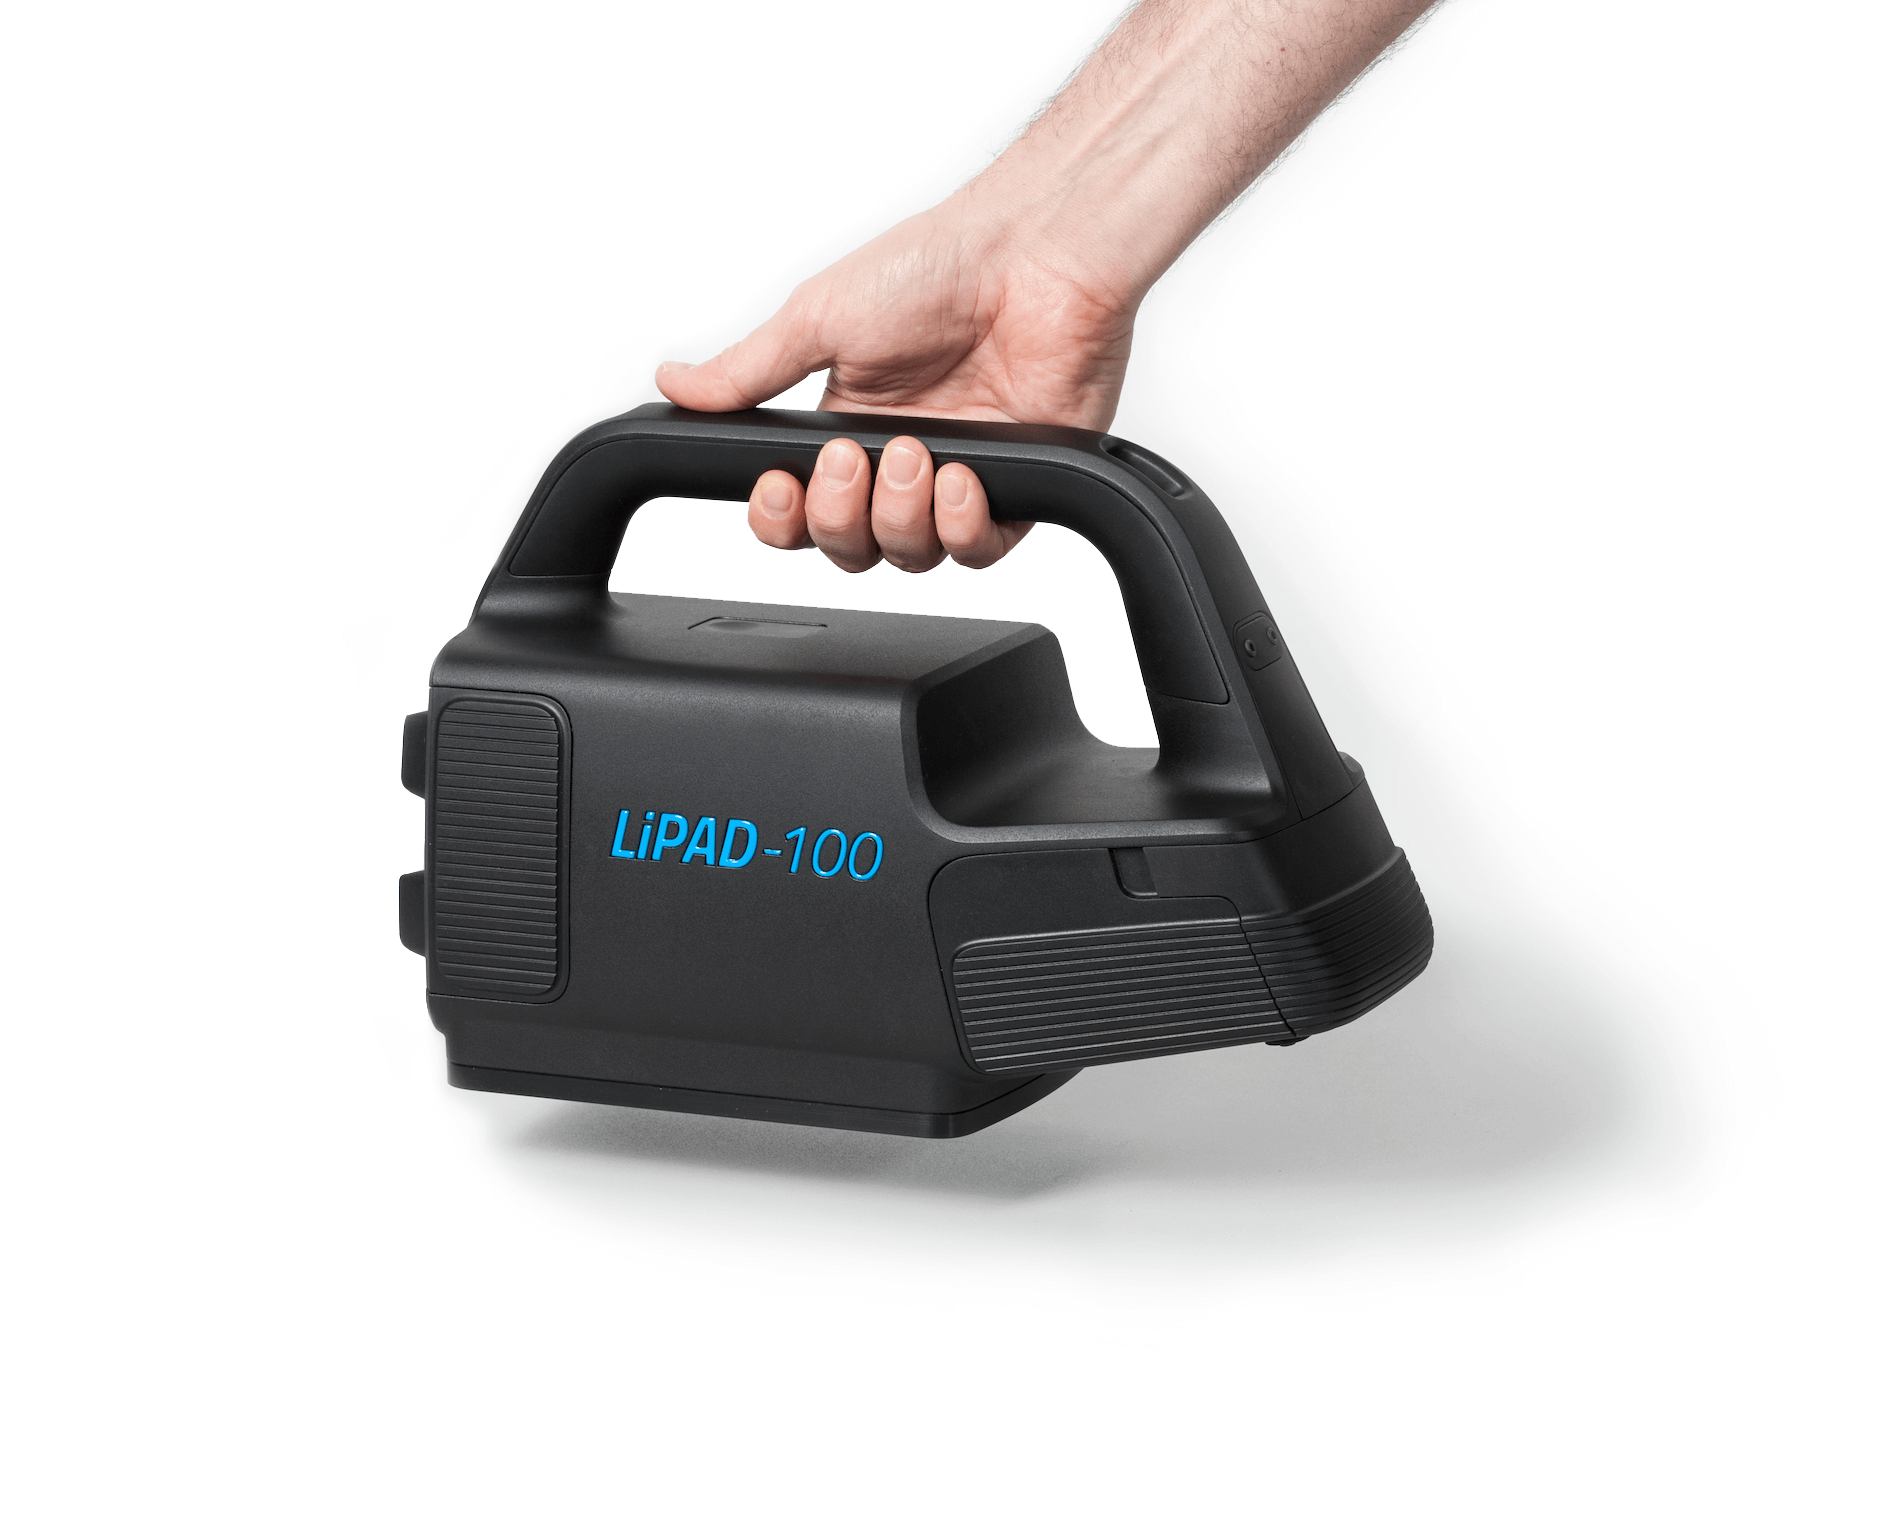 The measuring device LiPAD®-100 by LITEF is held with one hand, from above, into the picture.